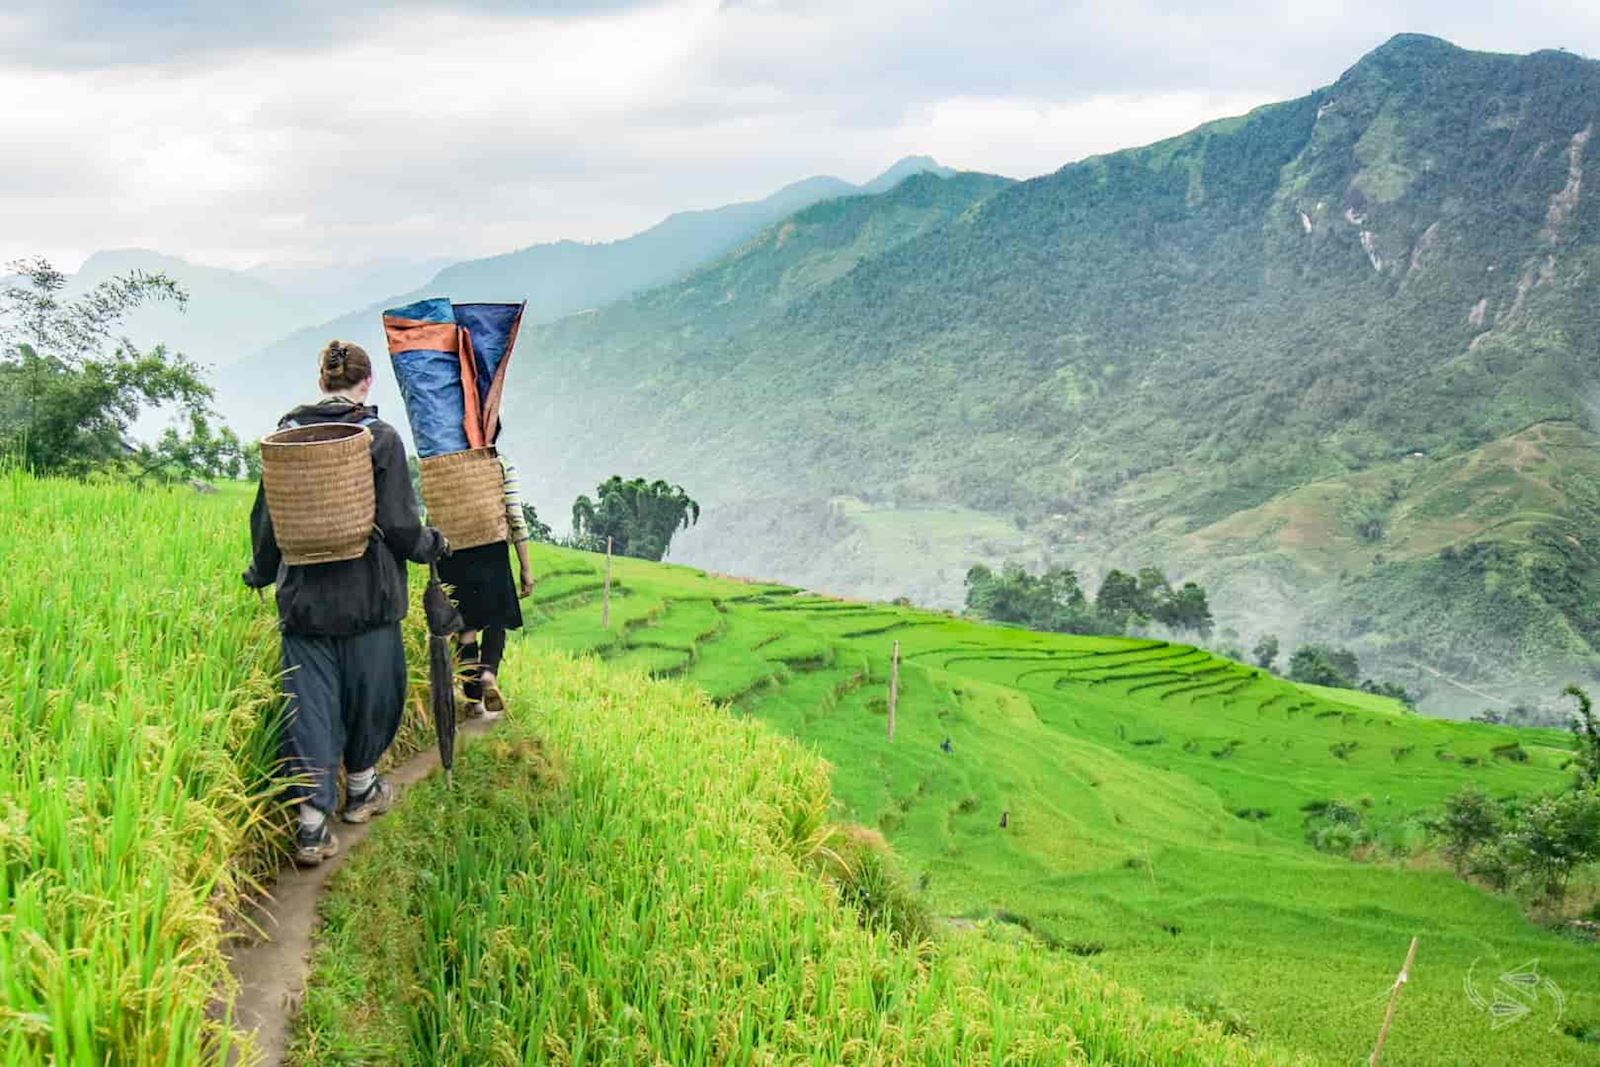 Ready to hit the trails and get lost in nature's wonder - touring in Vietnam